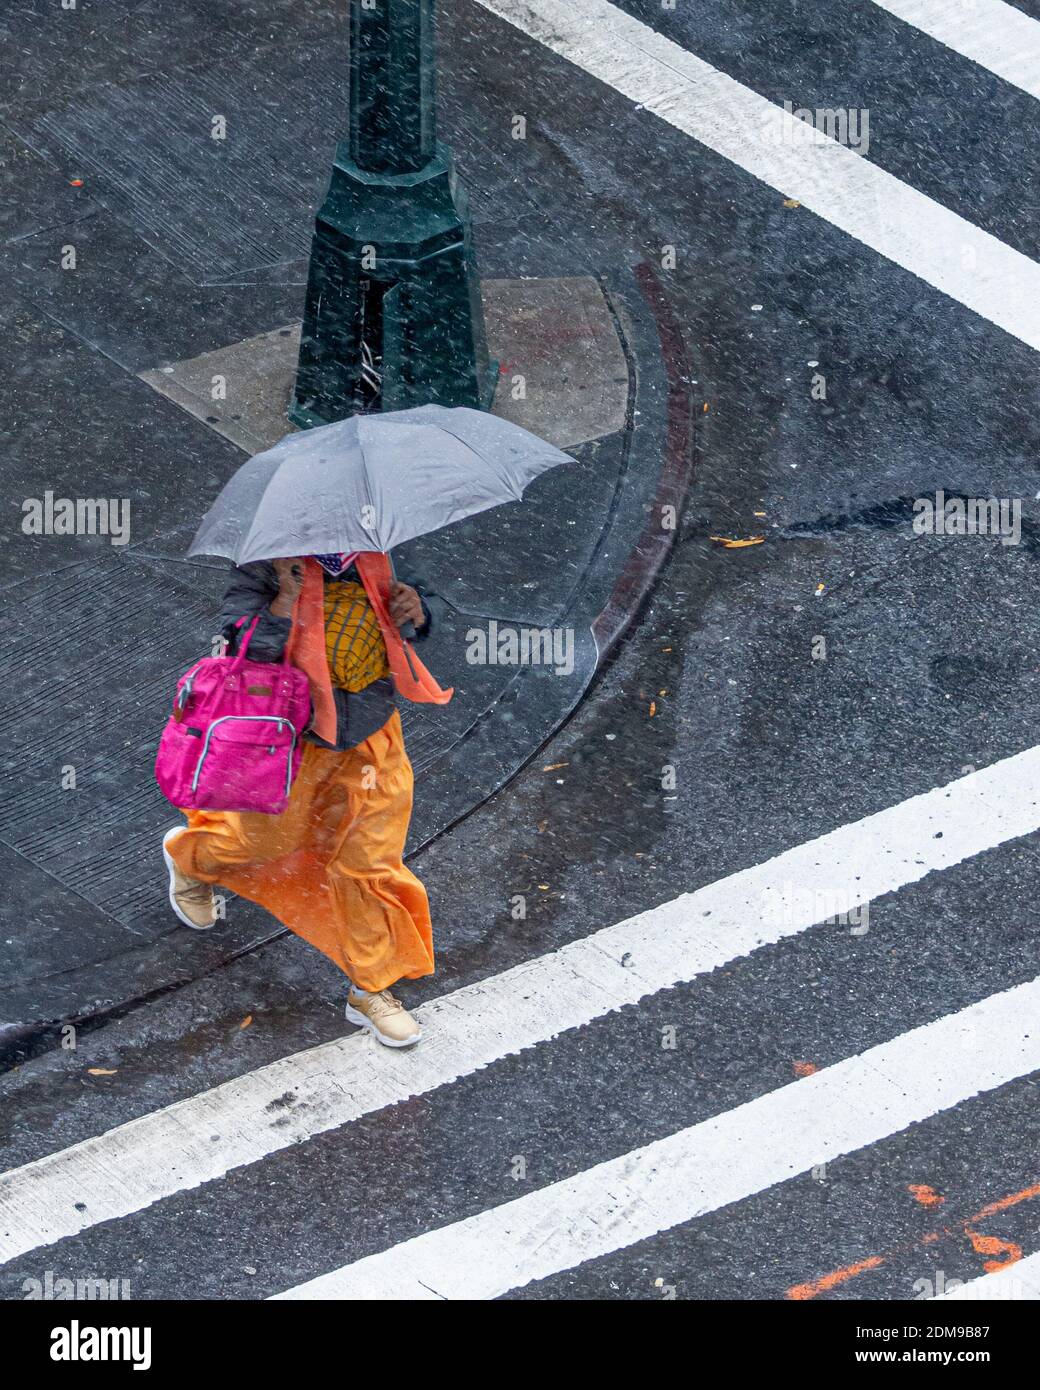 View from above of woman in colorful dress with umbrella crossing city street on a dreary day as bright clothing contrasts sharply with dark pavement. Stock Photo